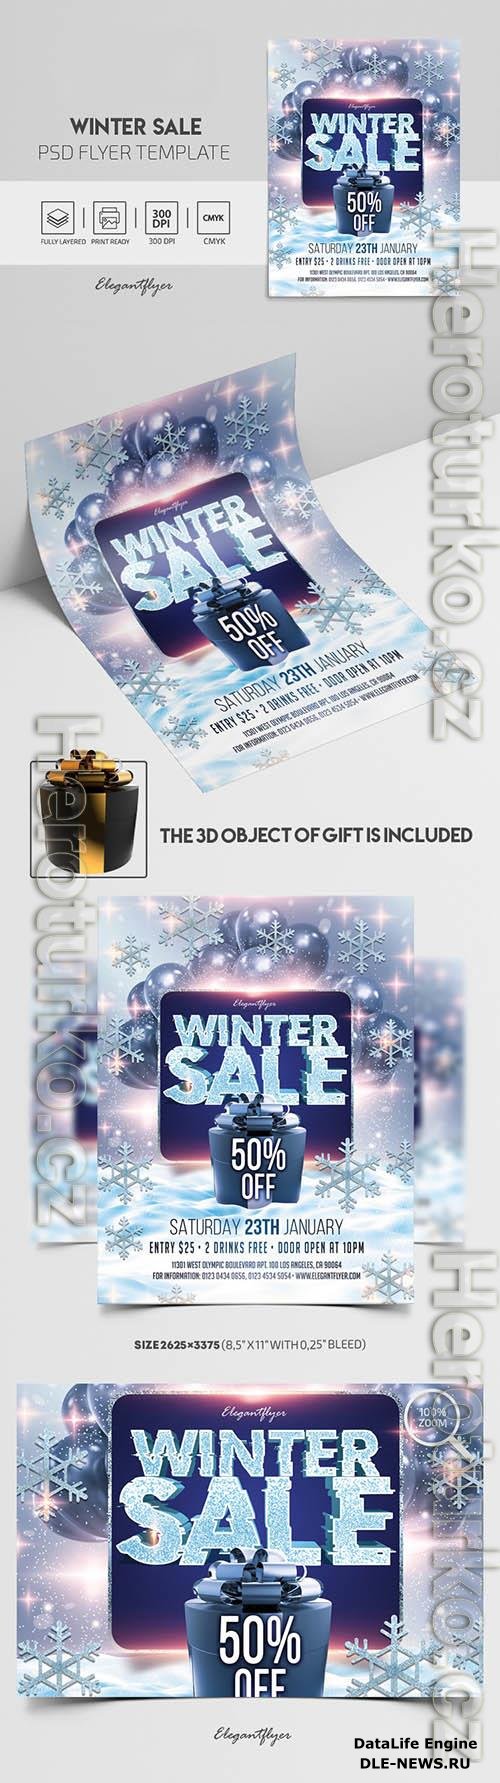 White Starry Winter Sale Flyer Template